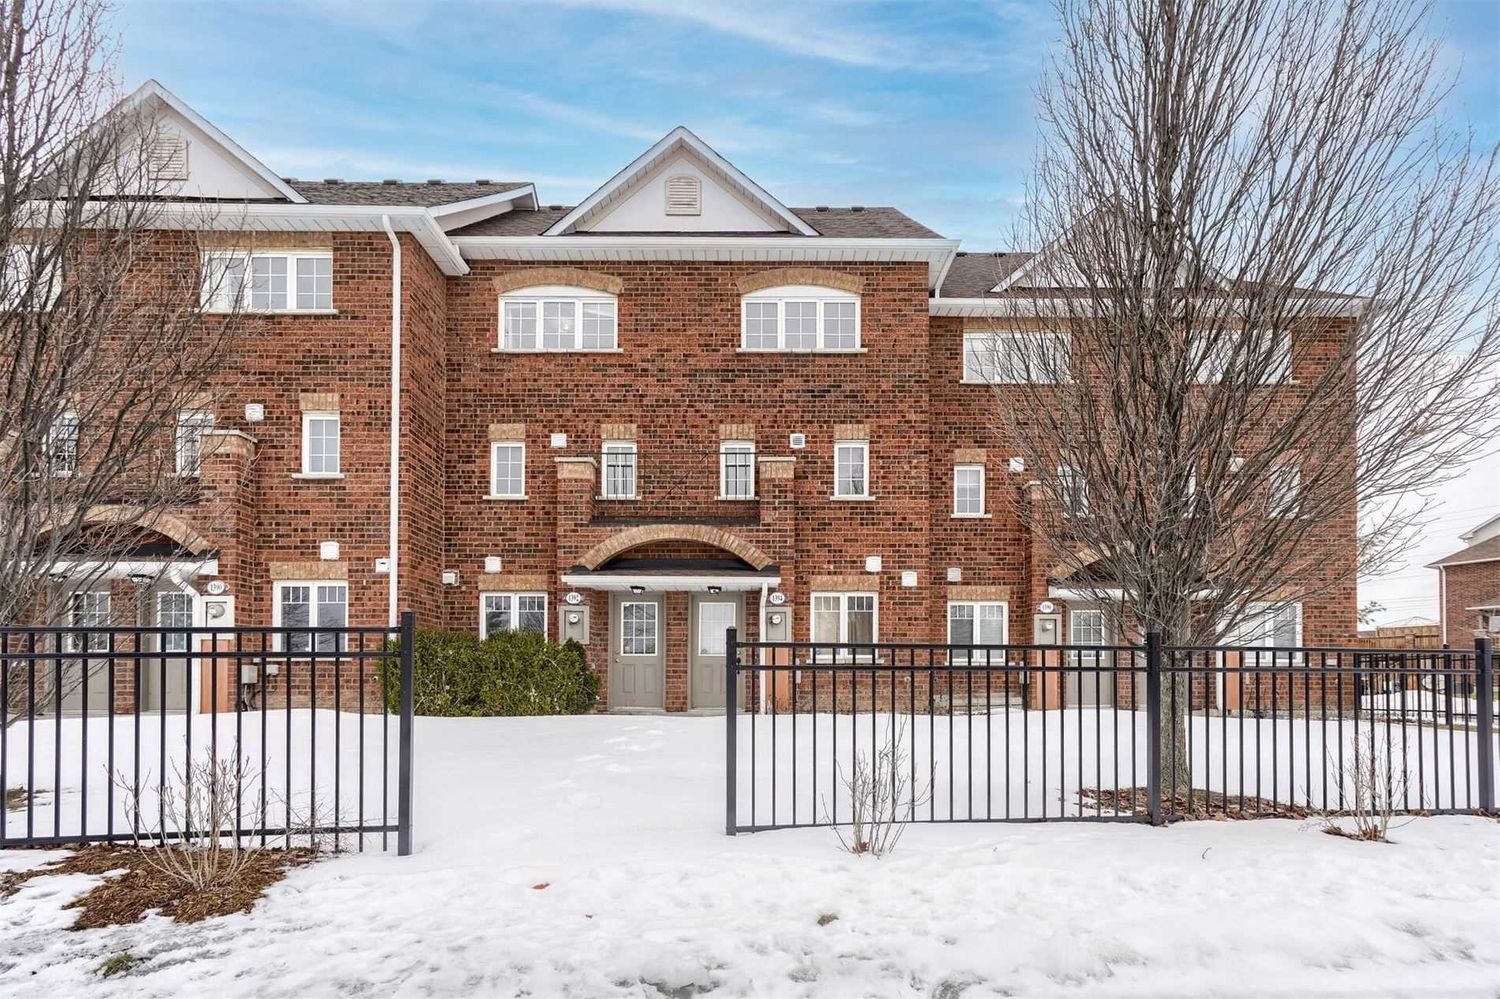 9420-9550 Sheppard Avenue E. Harmony North Townhomes is located in  Scarborough, Toronto - image #1 of 2